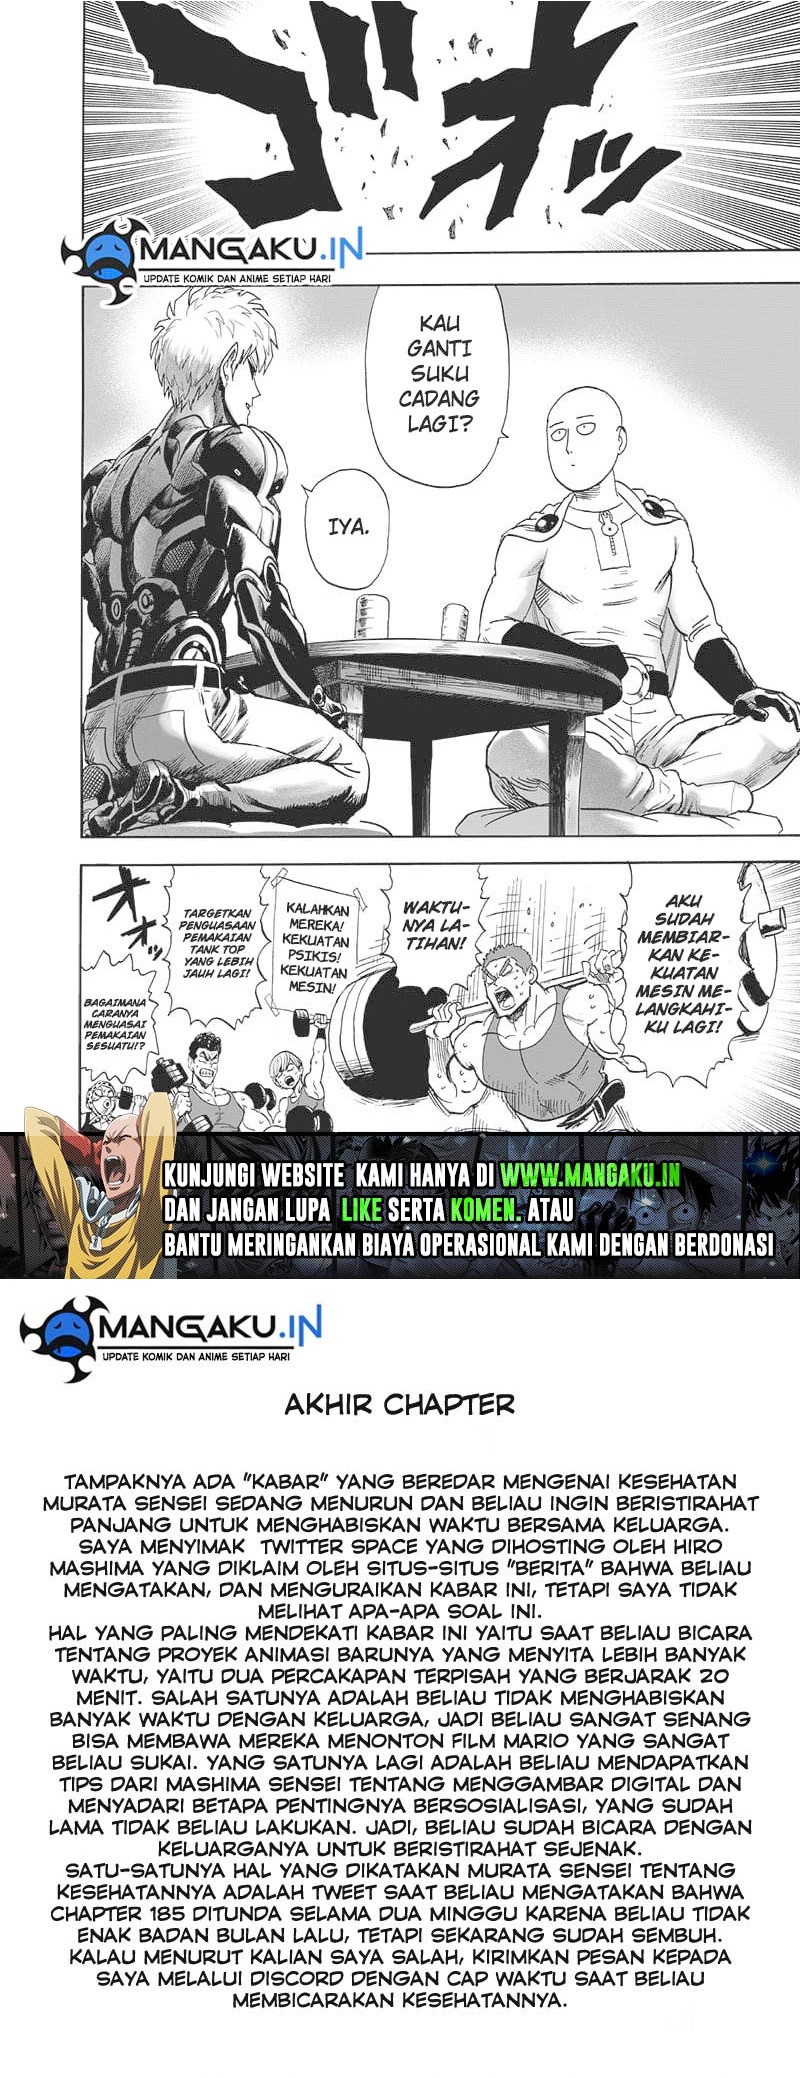 One Punch Man Chapter 235